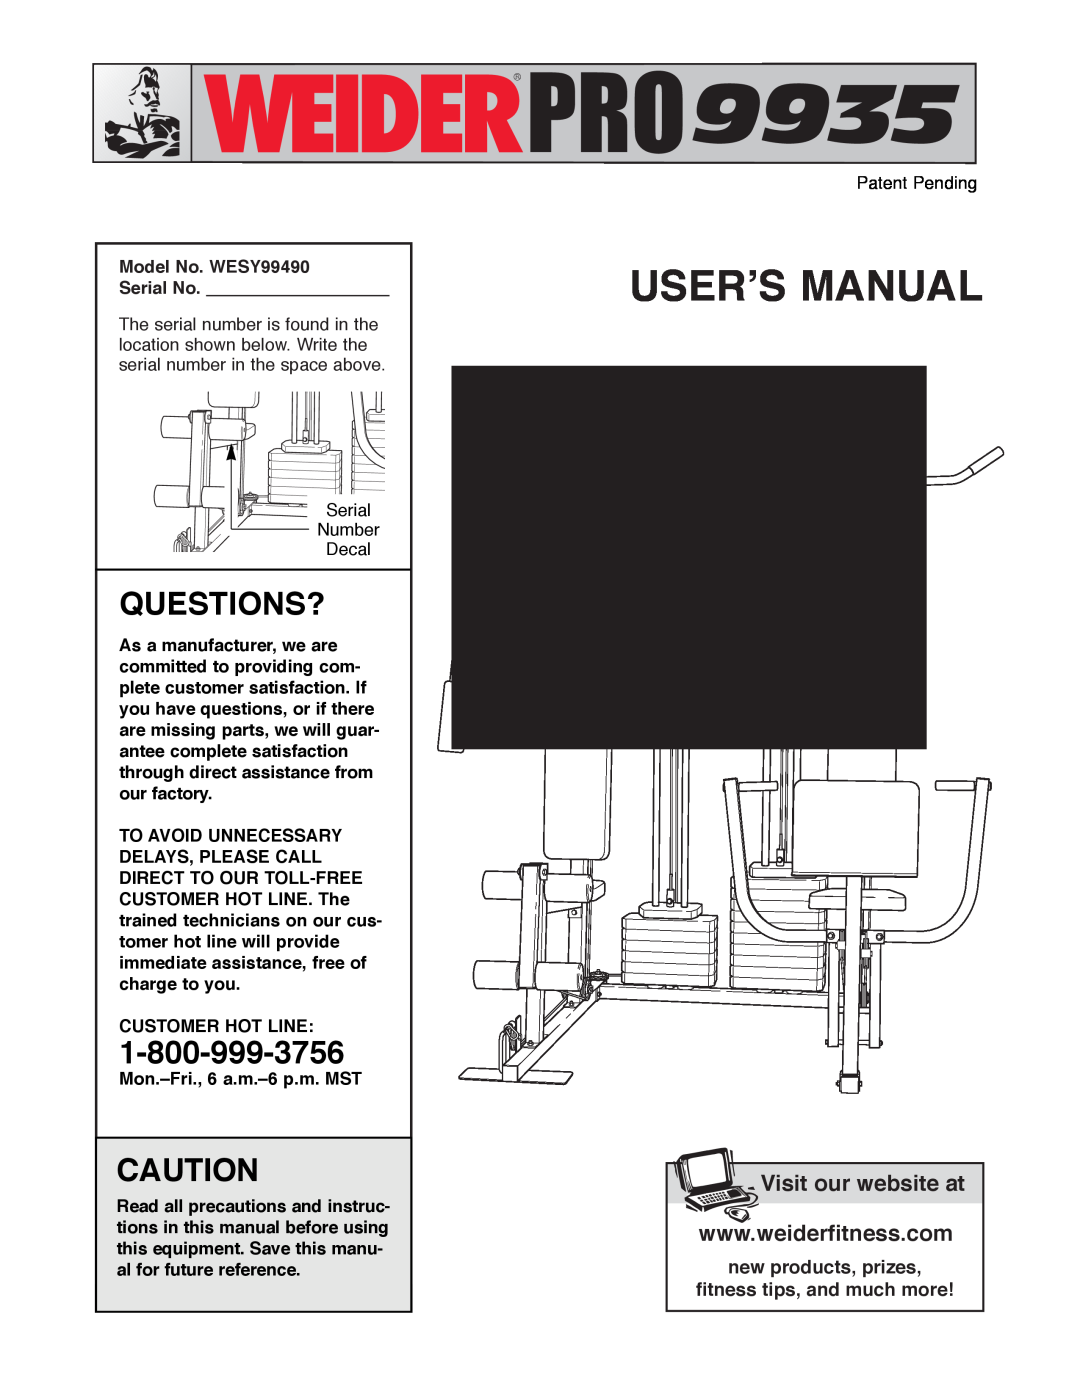 Weider WESY99490 manual Questions?, This Manual Received Several Drawing, Userõs Manual, Visit our website at 